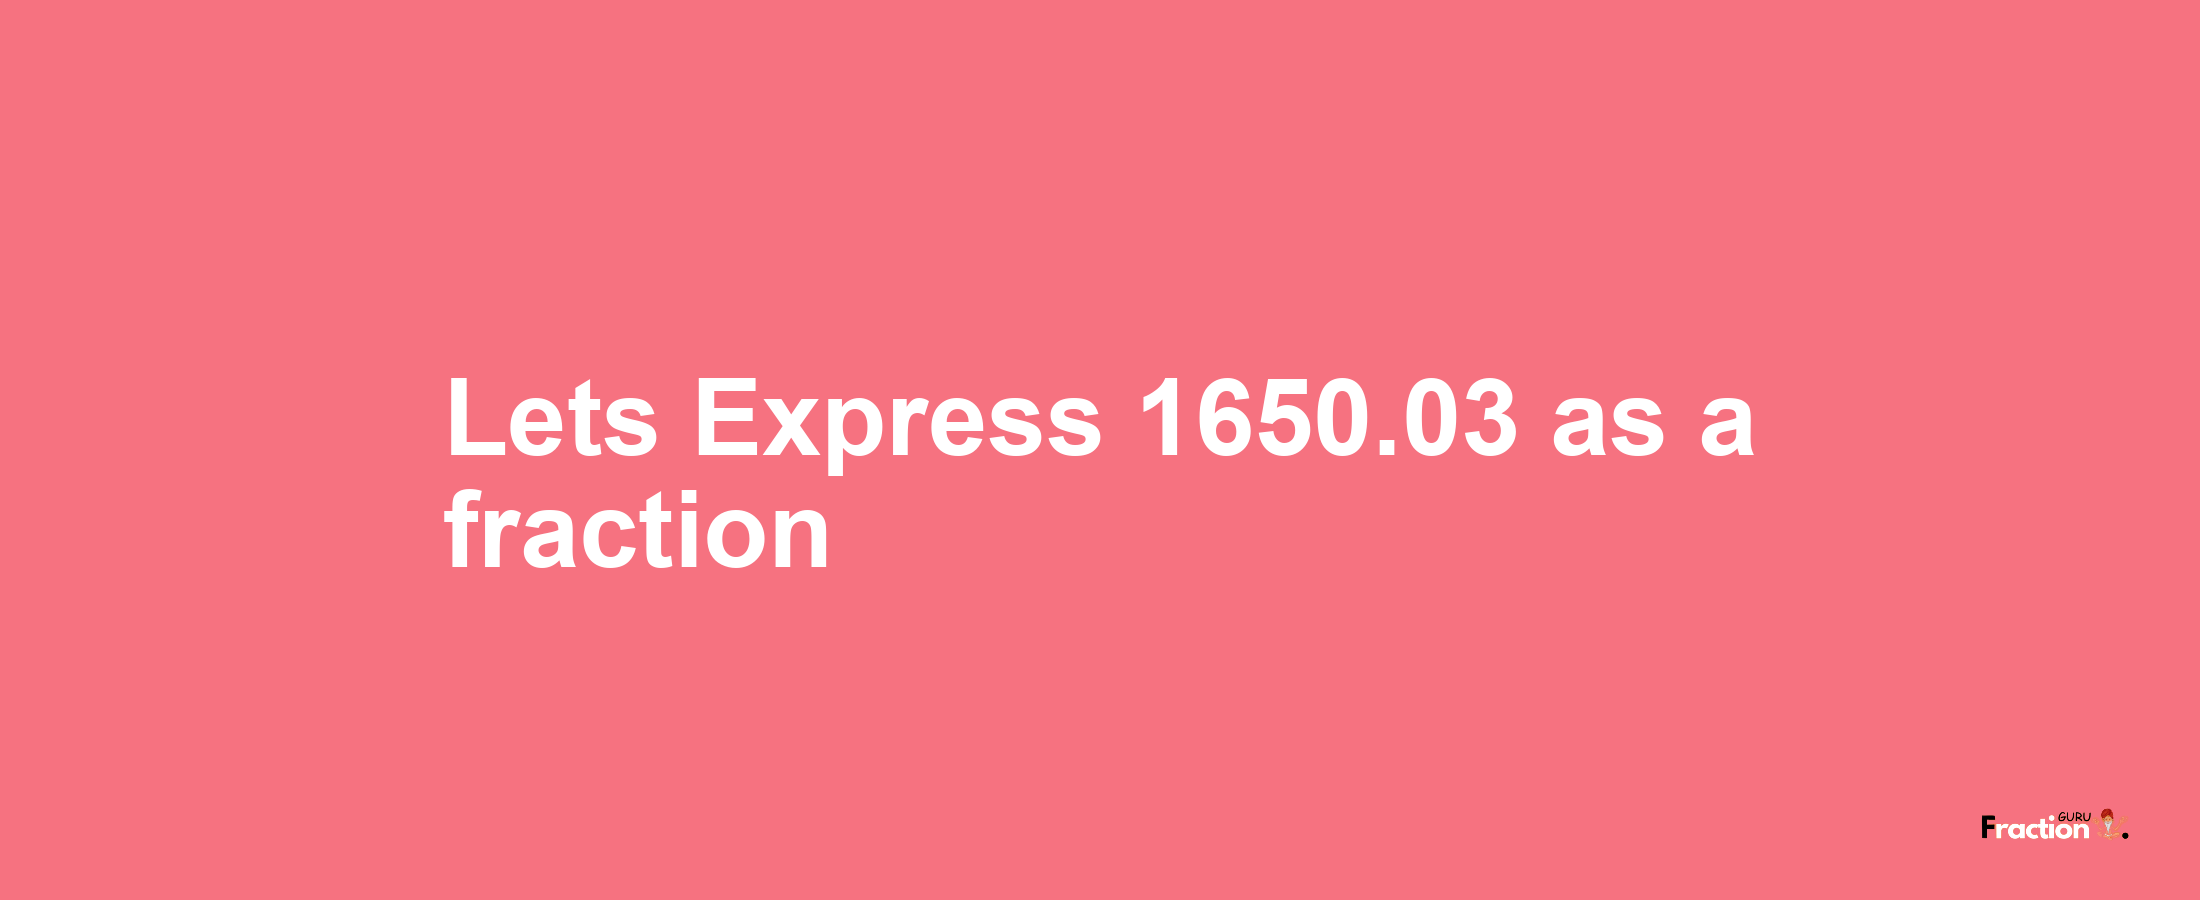 Lets Express 1650.03 as afraction